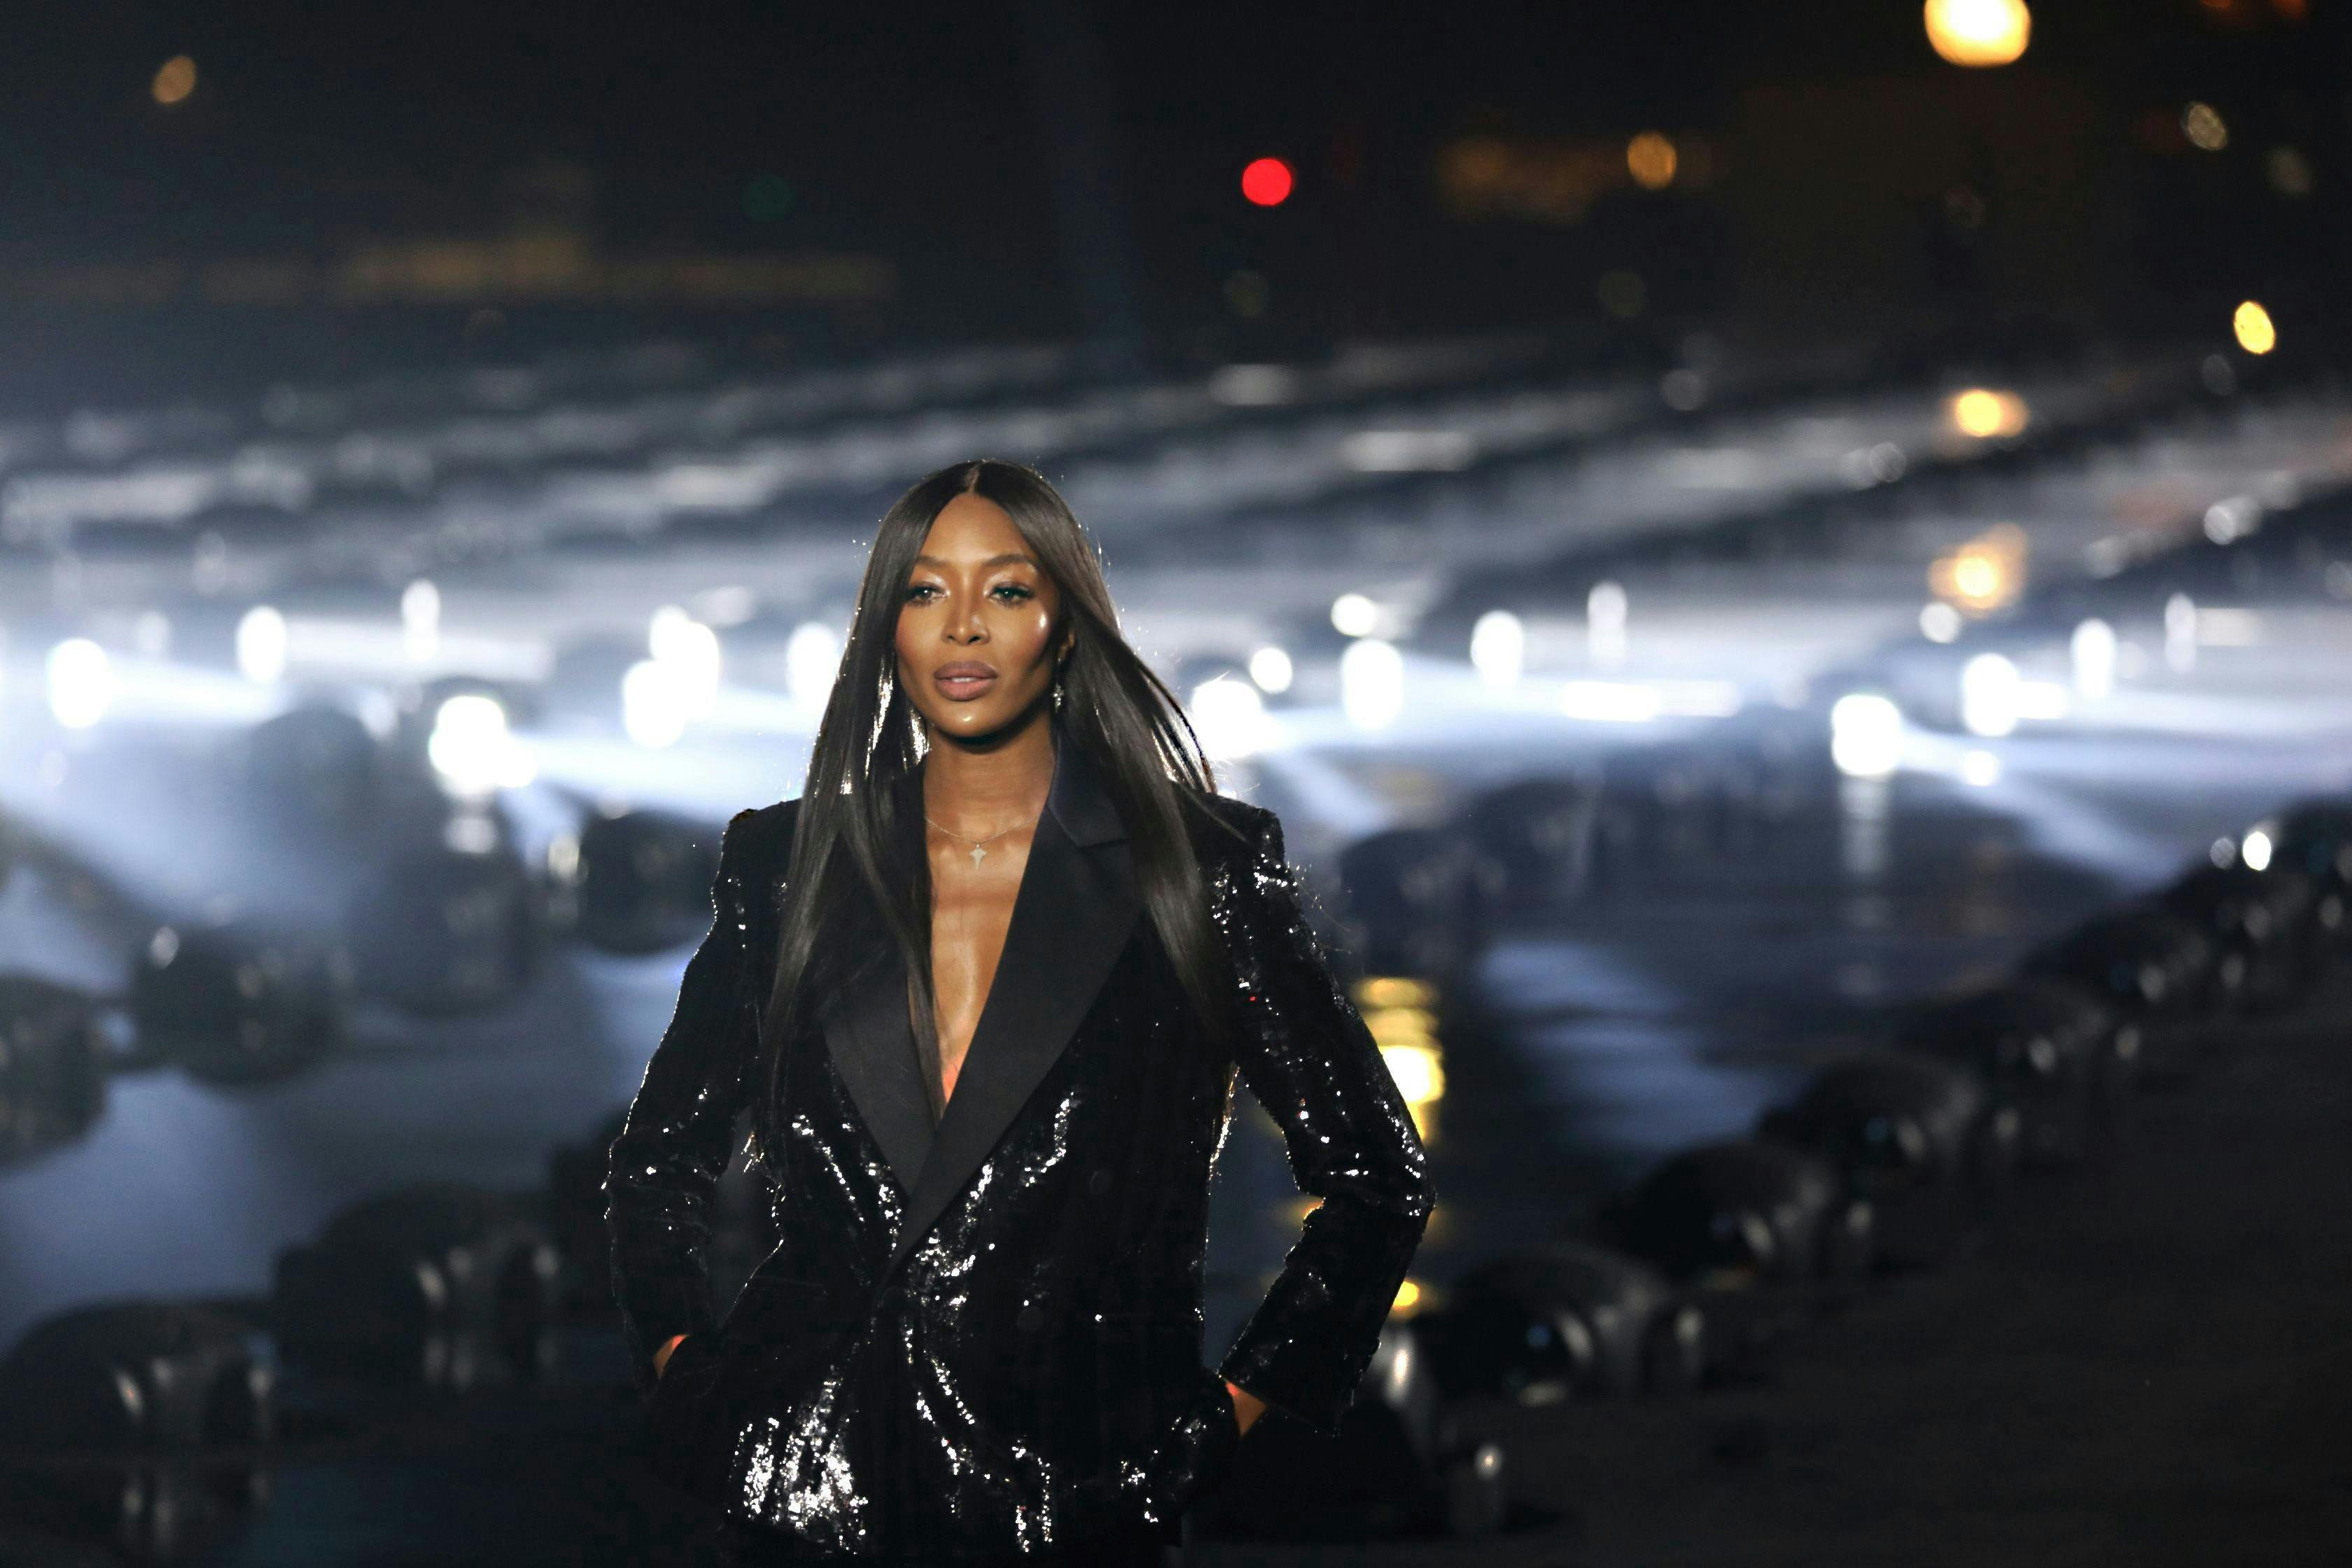 fashion s/s 2020 saint laurent paris france 24 sep 2019 naomi campbell wears a creation as part ready wear springsummer collection unveiled during week celebrity entertainment arts shows beauty lifestyle design western europe model actor 83556078 clothing apparel jacket coat leather jacket person human